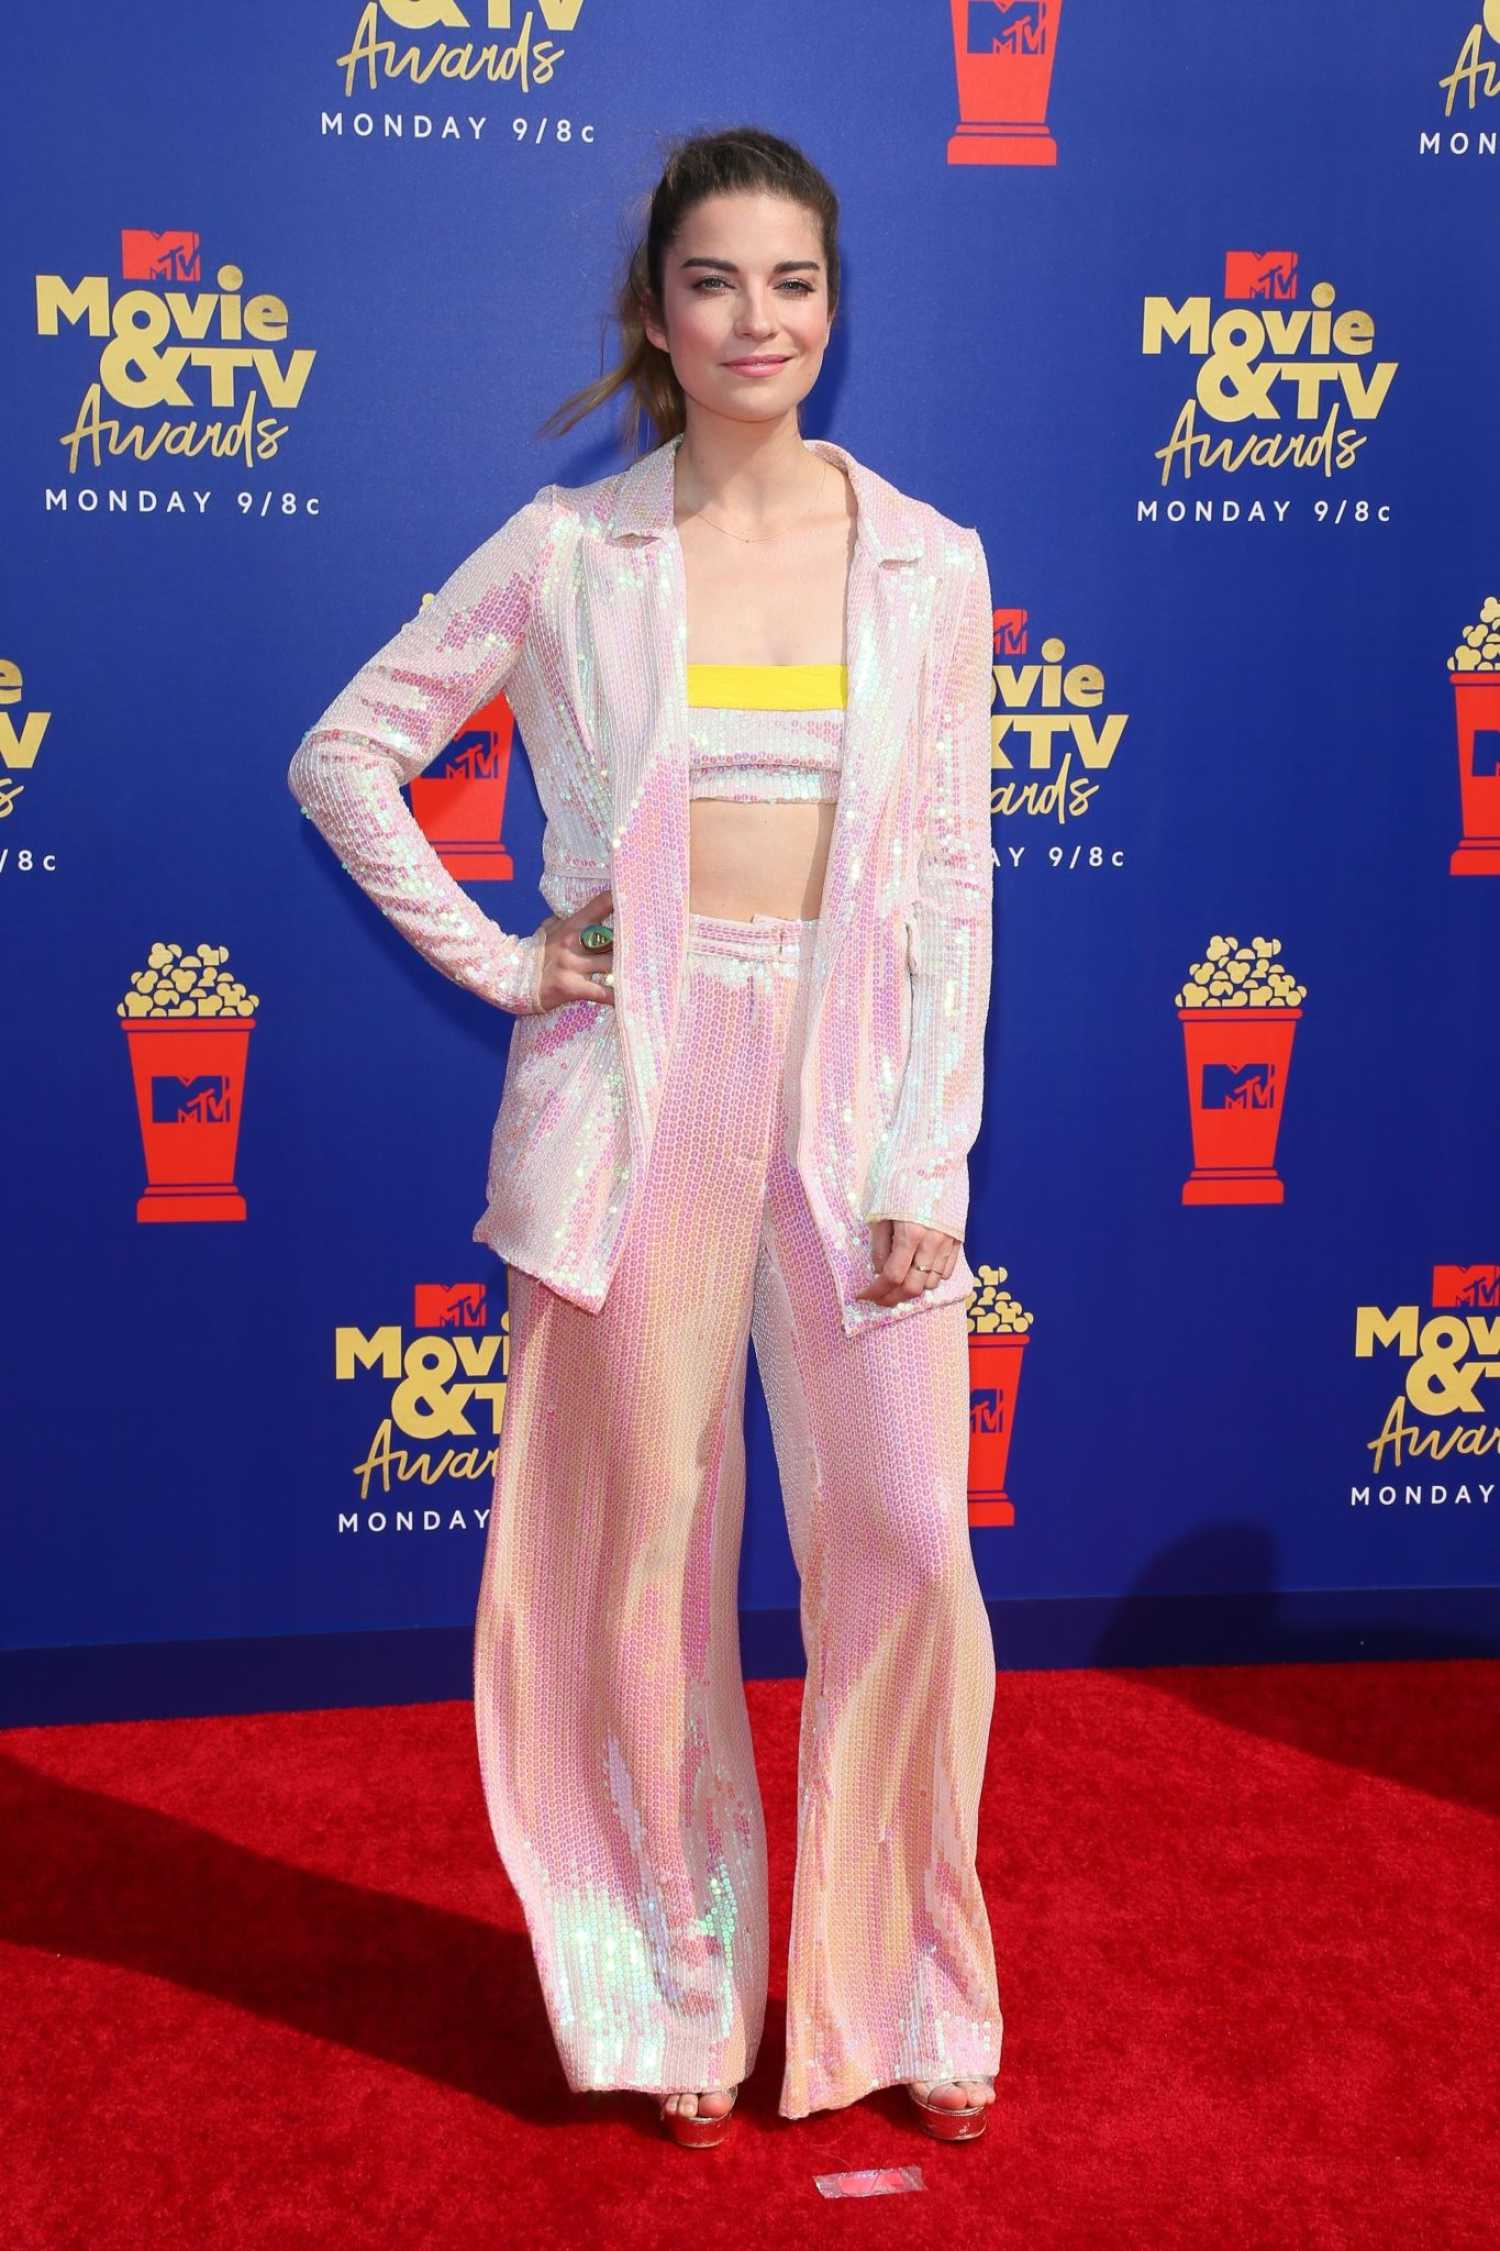 Annie Murphy Attends 2019 MTV Movie and TV Awards at Barker Hangar in